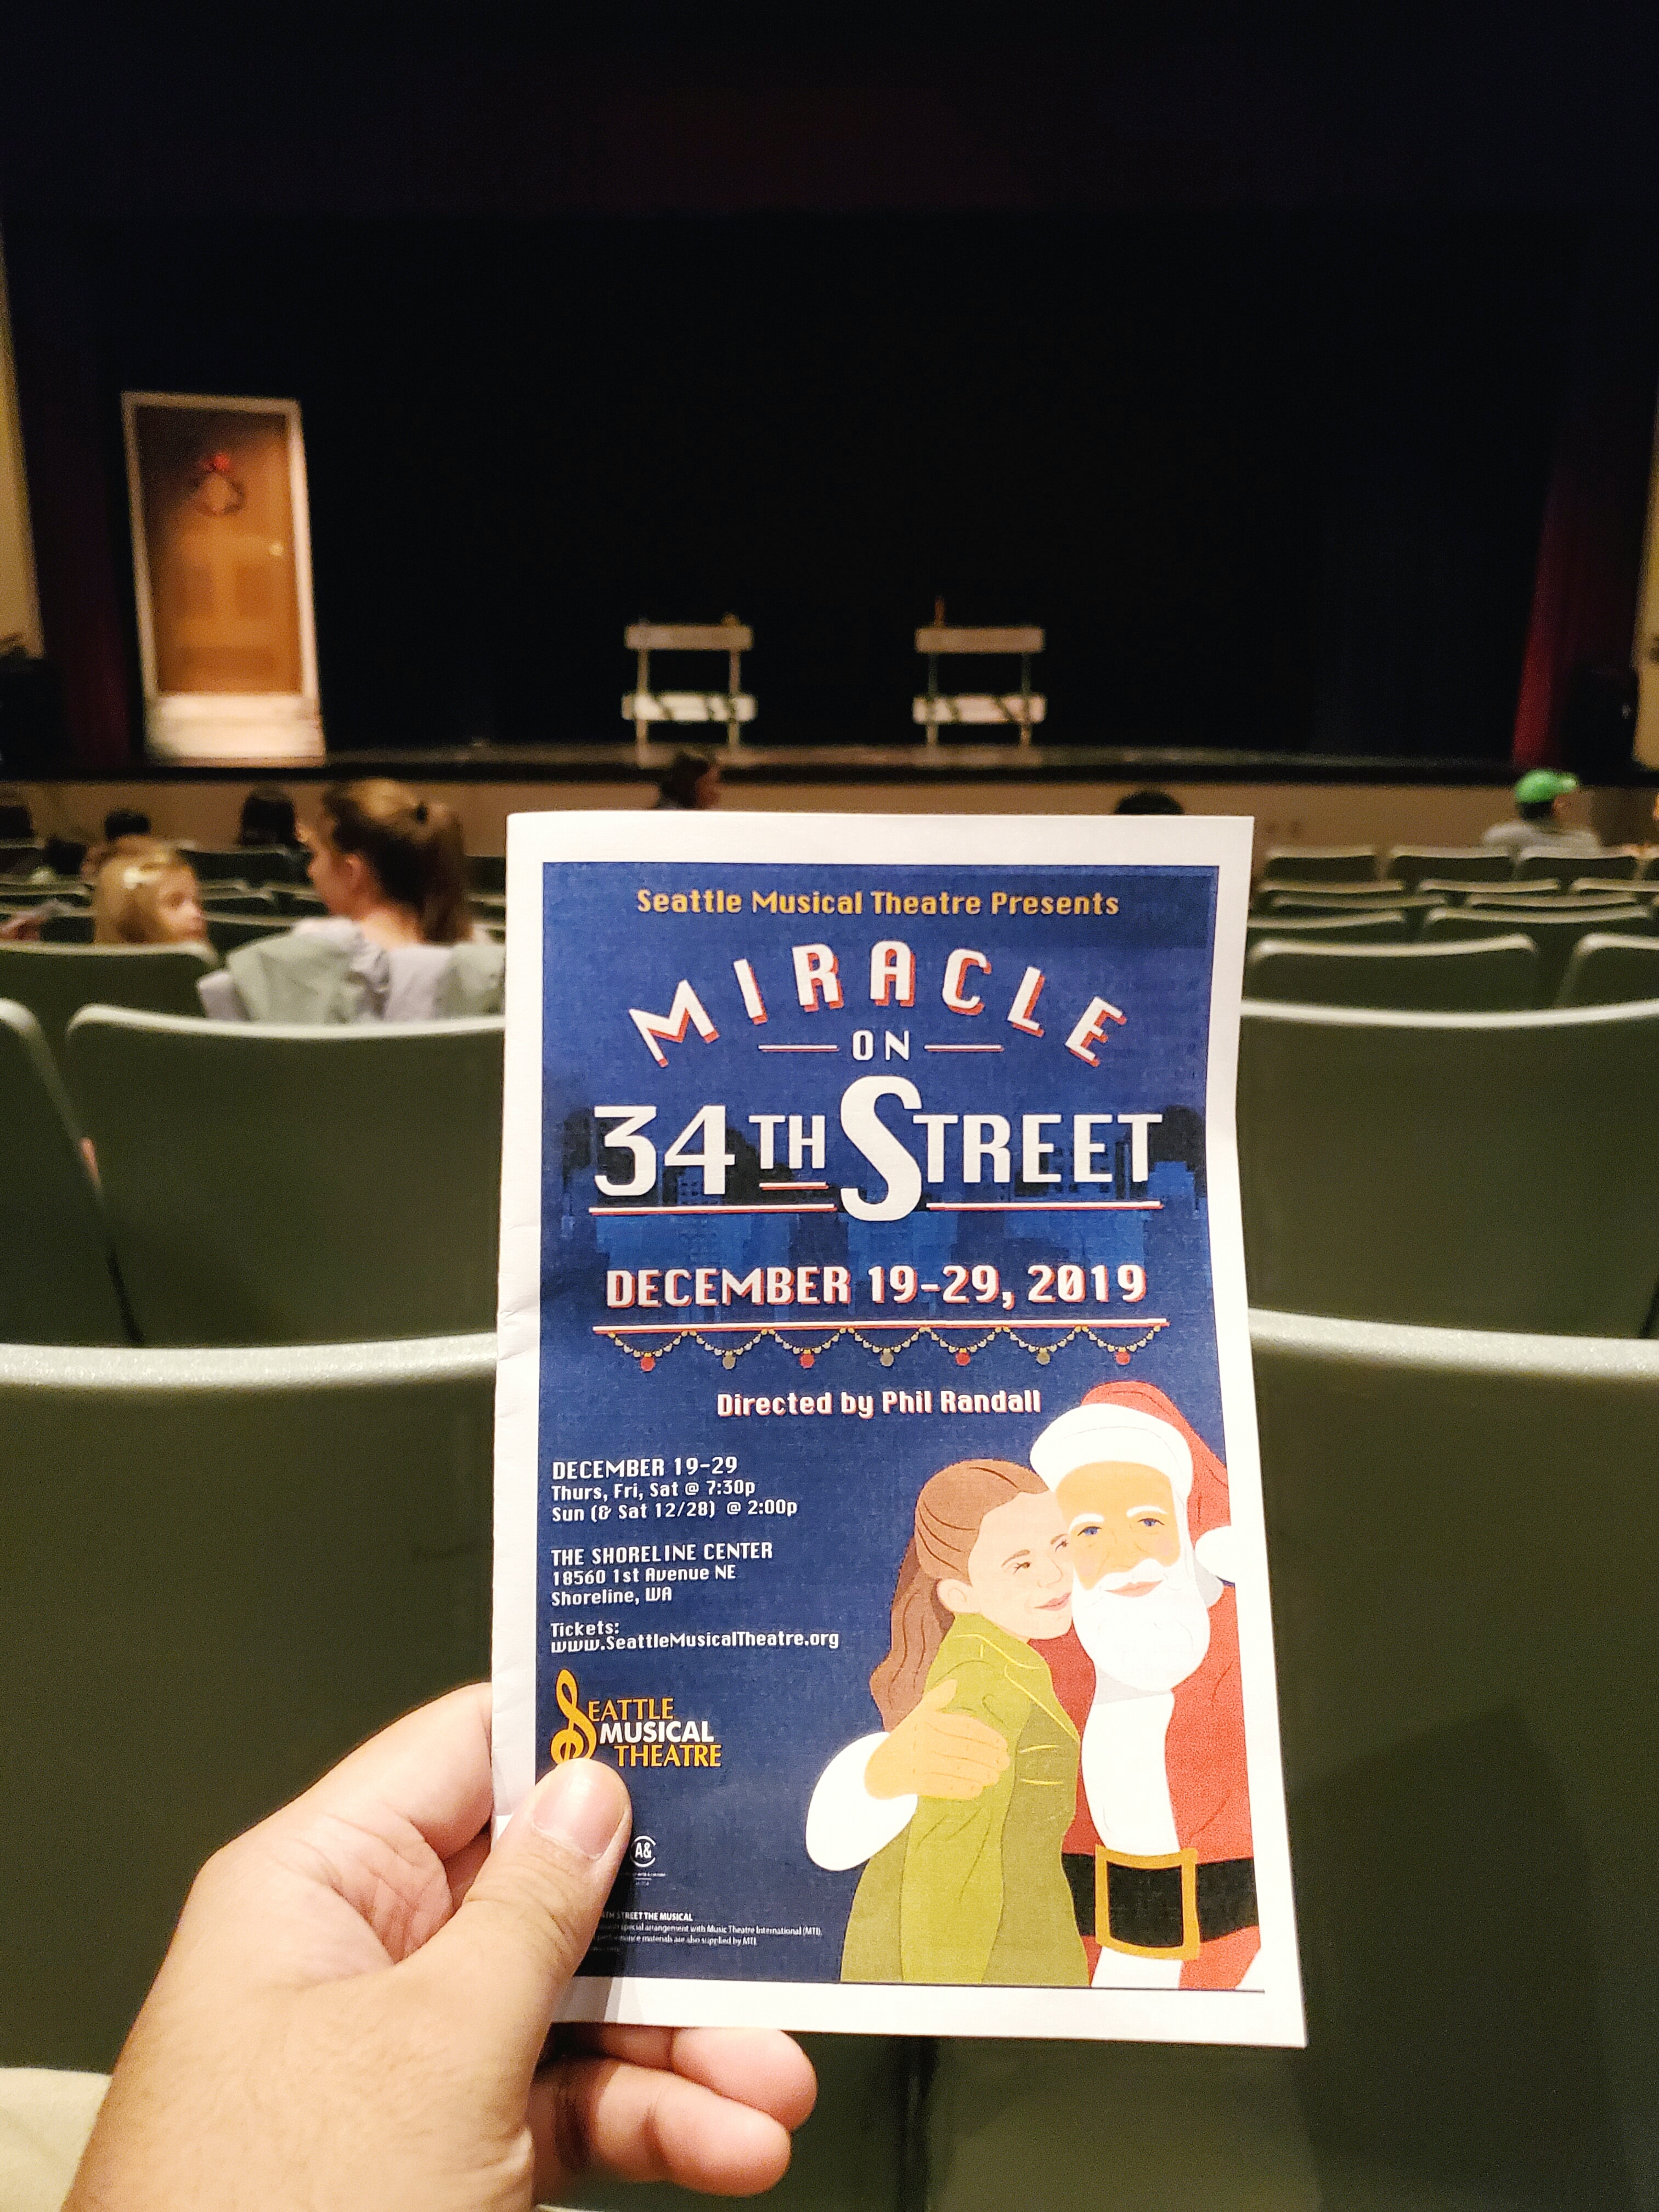 Miracle on 34th Street #musical adaptation w/ Seattle Musical Theatre. Lead actors were good but the overhead stage microphones allowed the live band/orchestra to overpower them. #Xmas #Christmas #Santa